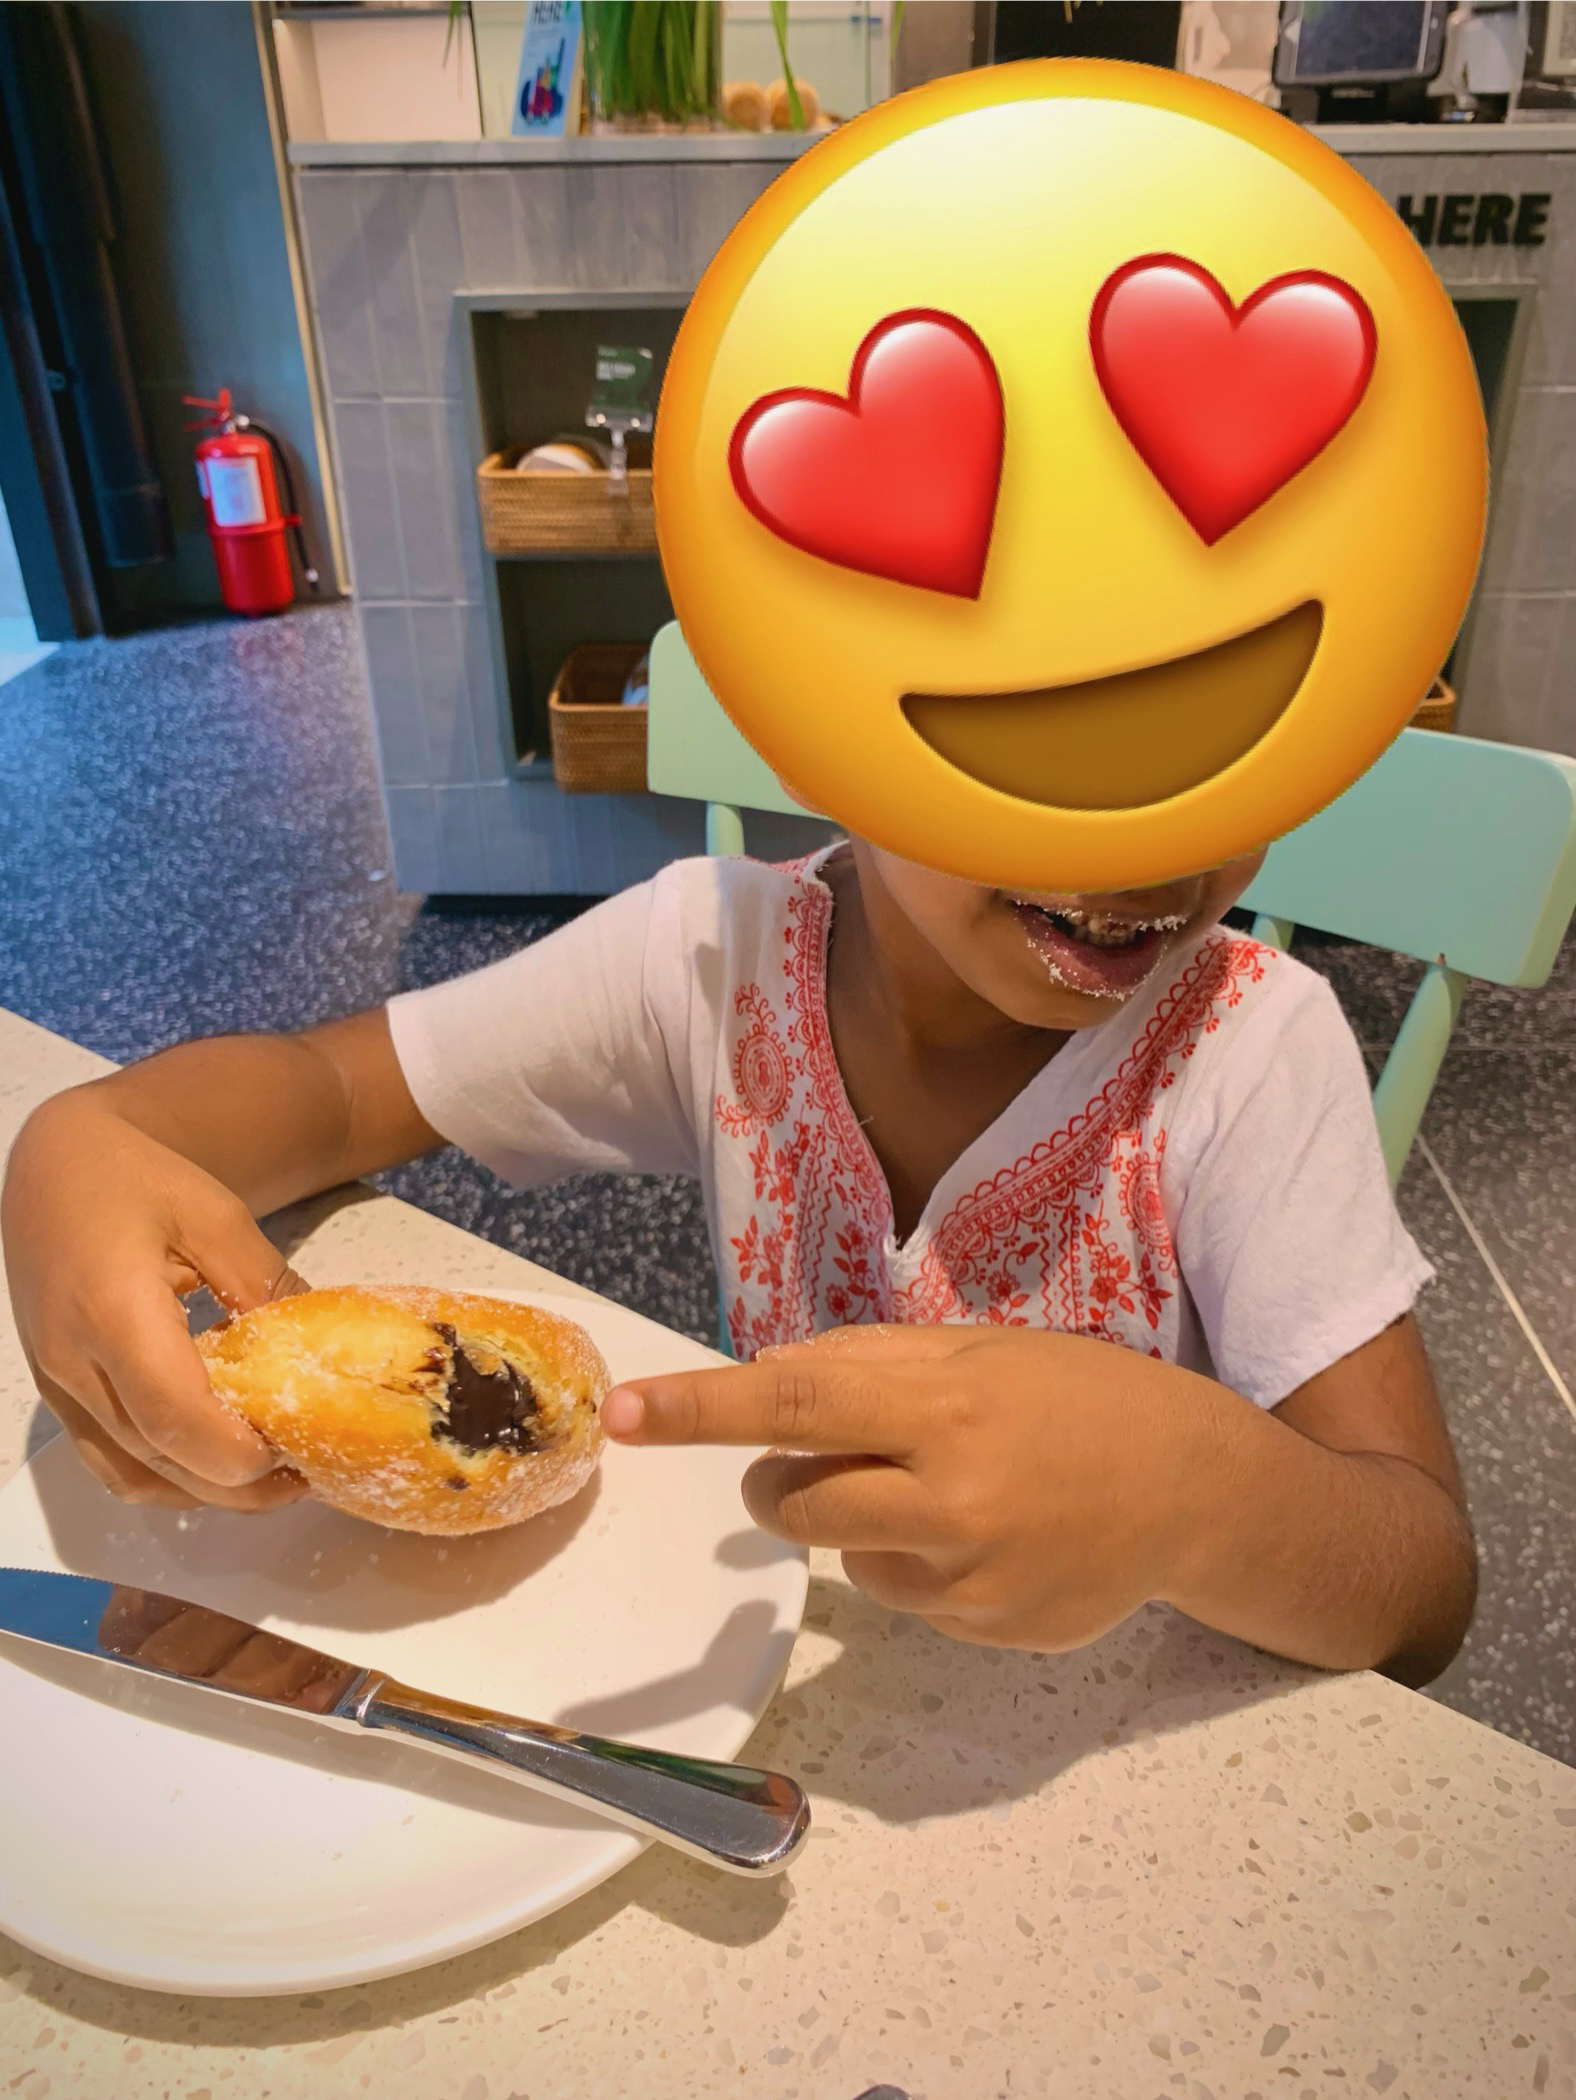 A young boy, whose face masked is with an emoji, enjoying a chocolate filled donut.